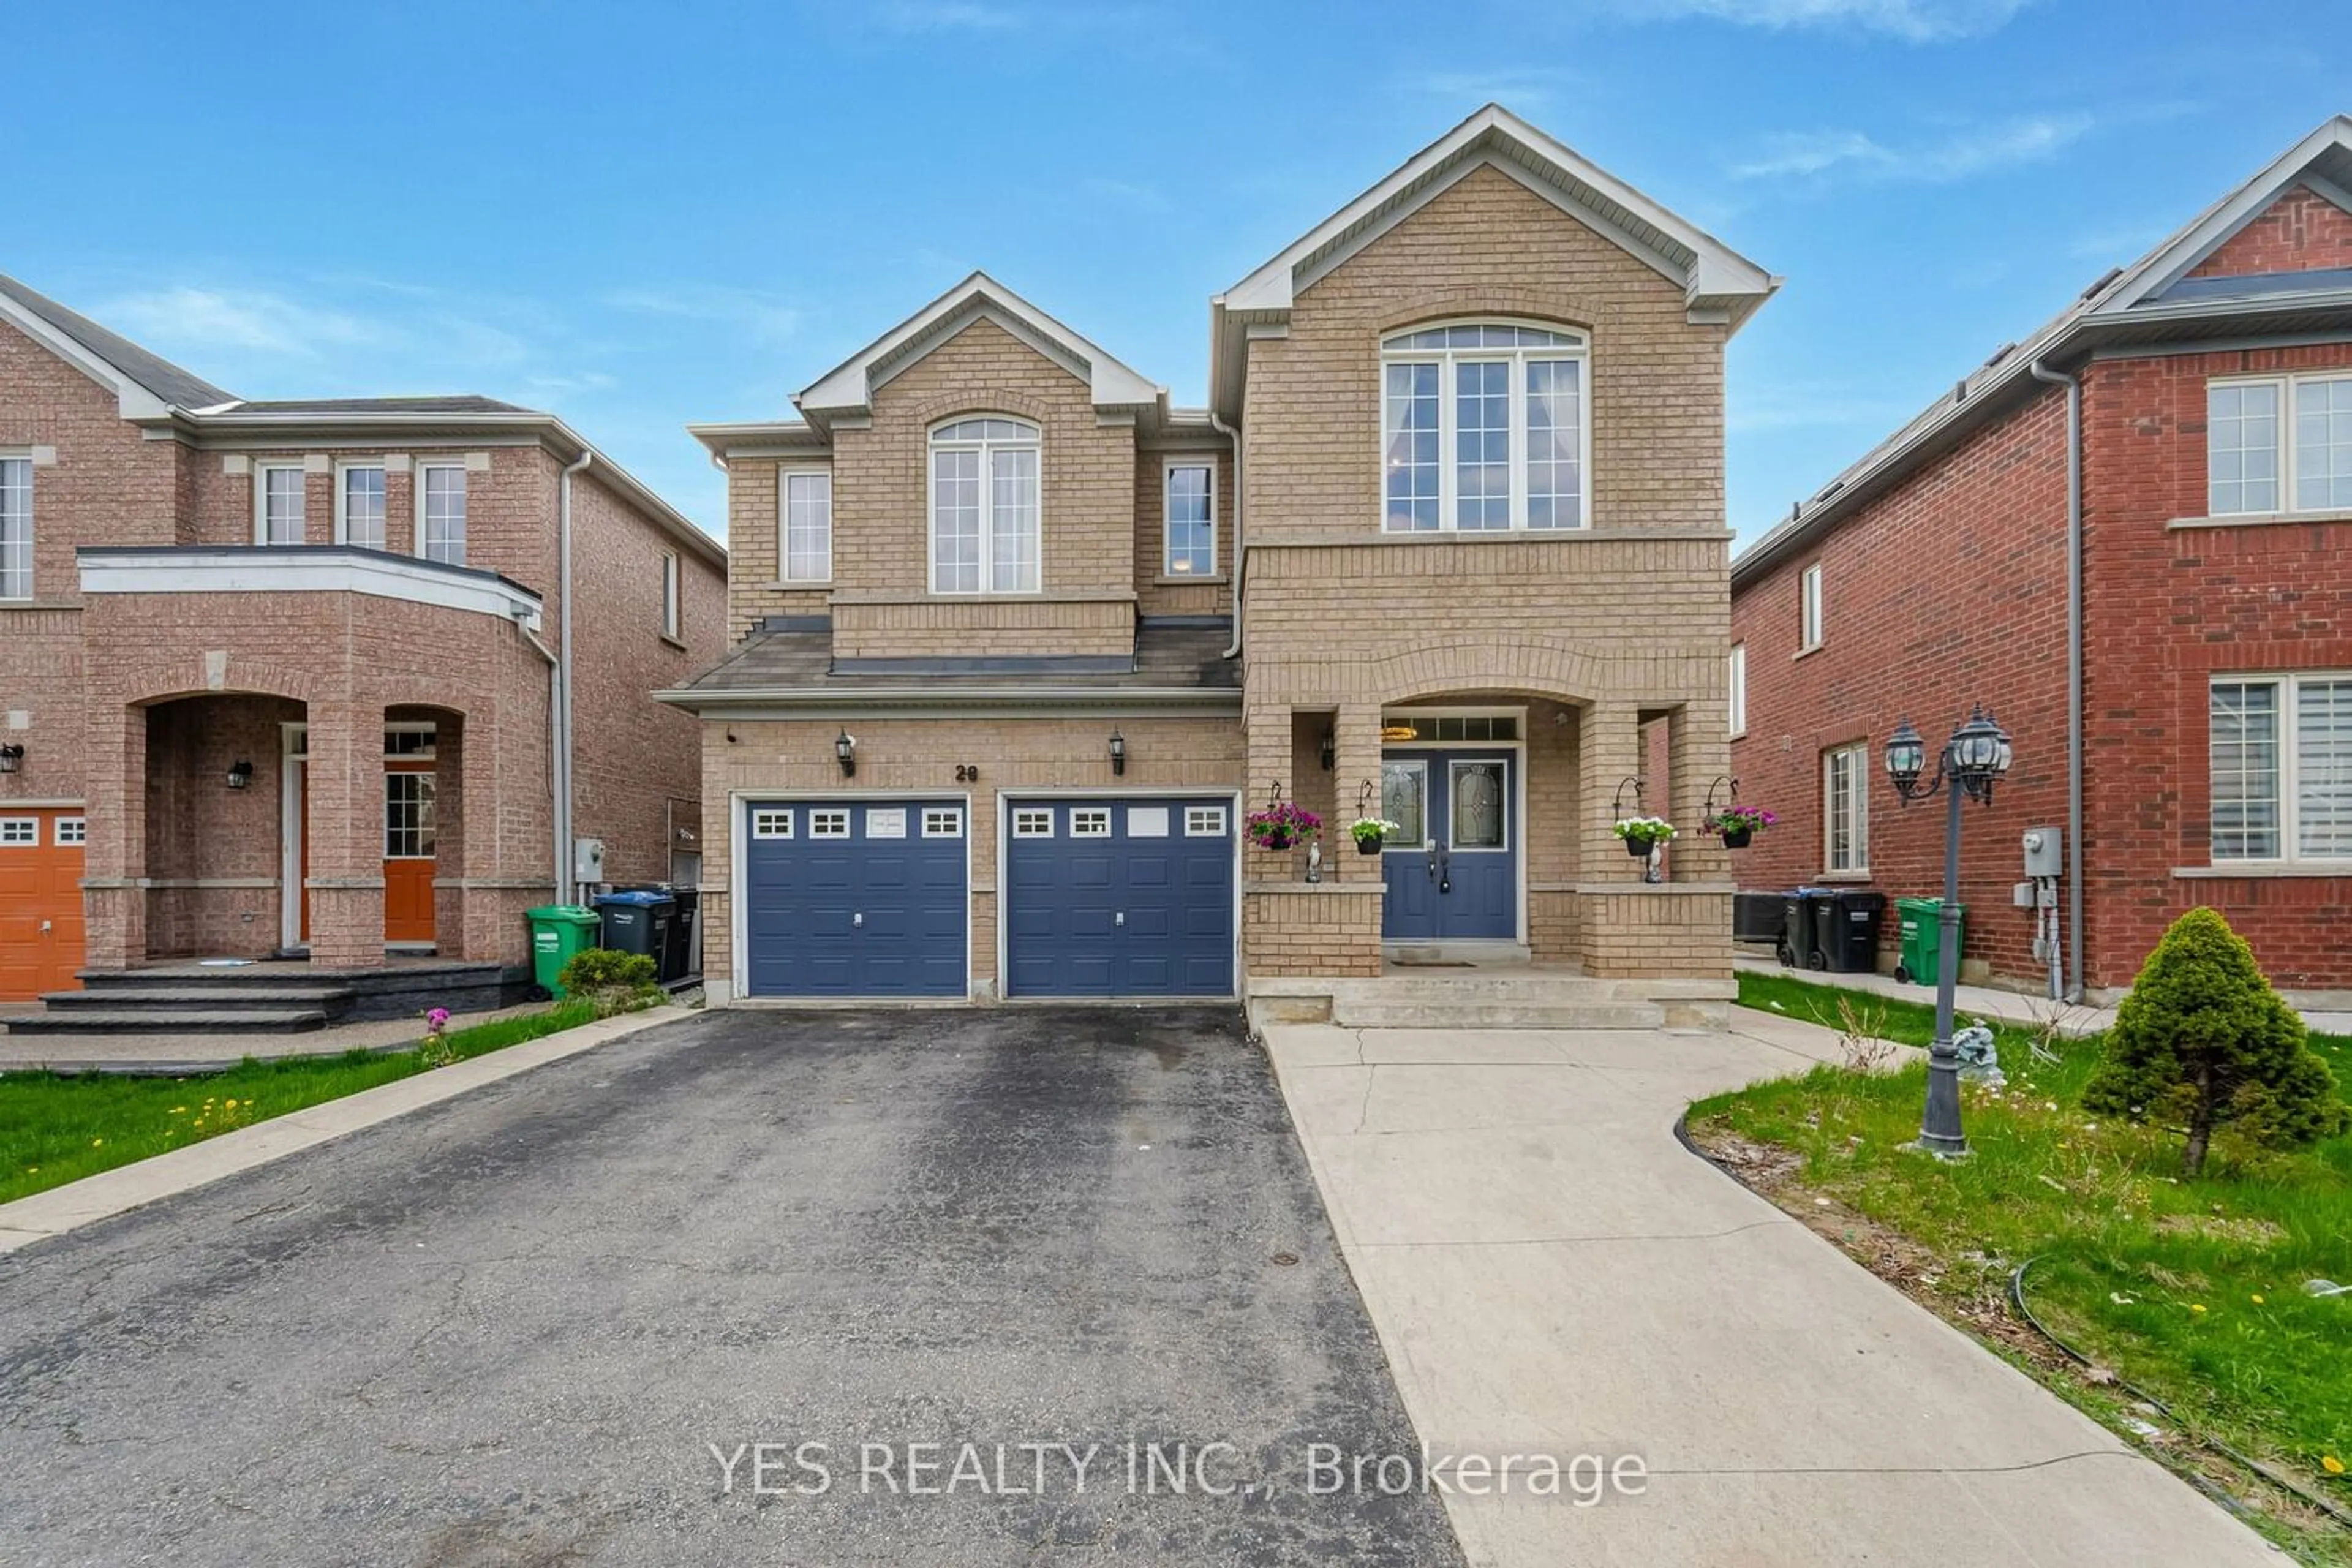 Home with brick exterior material for 28 Totten Dr, Brampton Ontario L6R 0P5